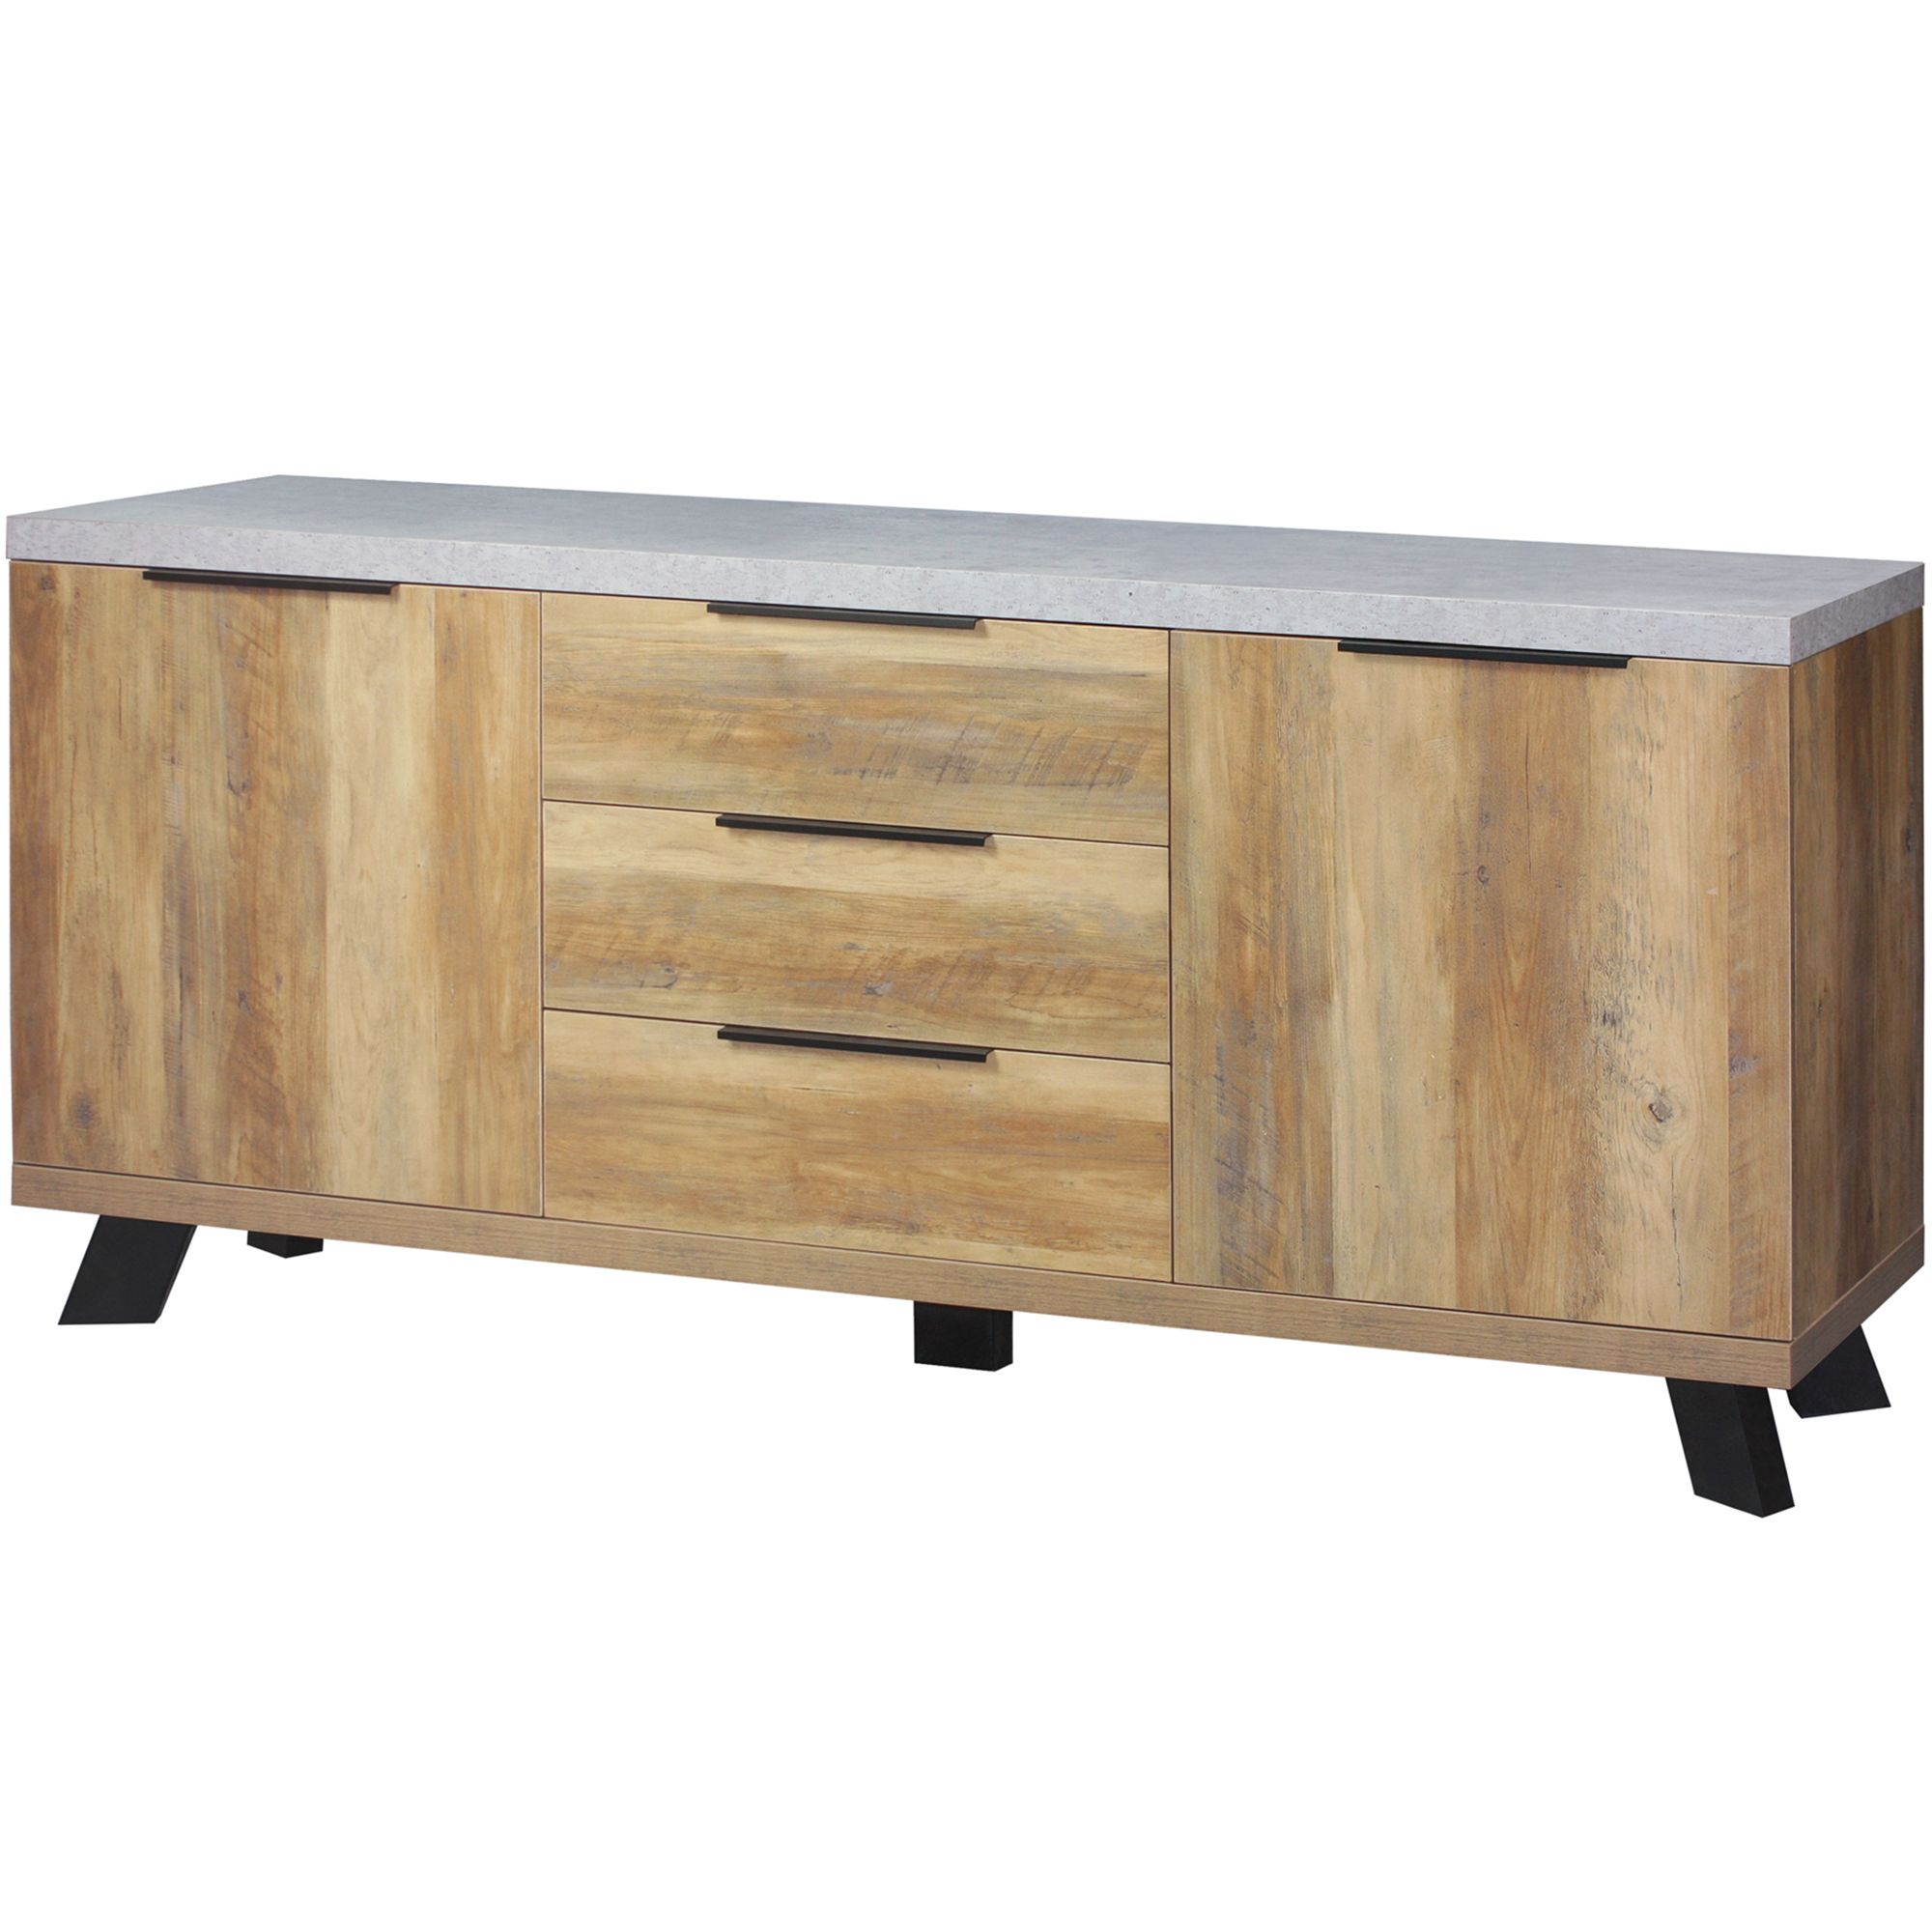 Sideboards & Buffets | Temple & Webster Within Modern Lacquer 2 Door 3 Drawer Buffets (View 14 of 20)